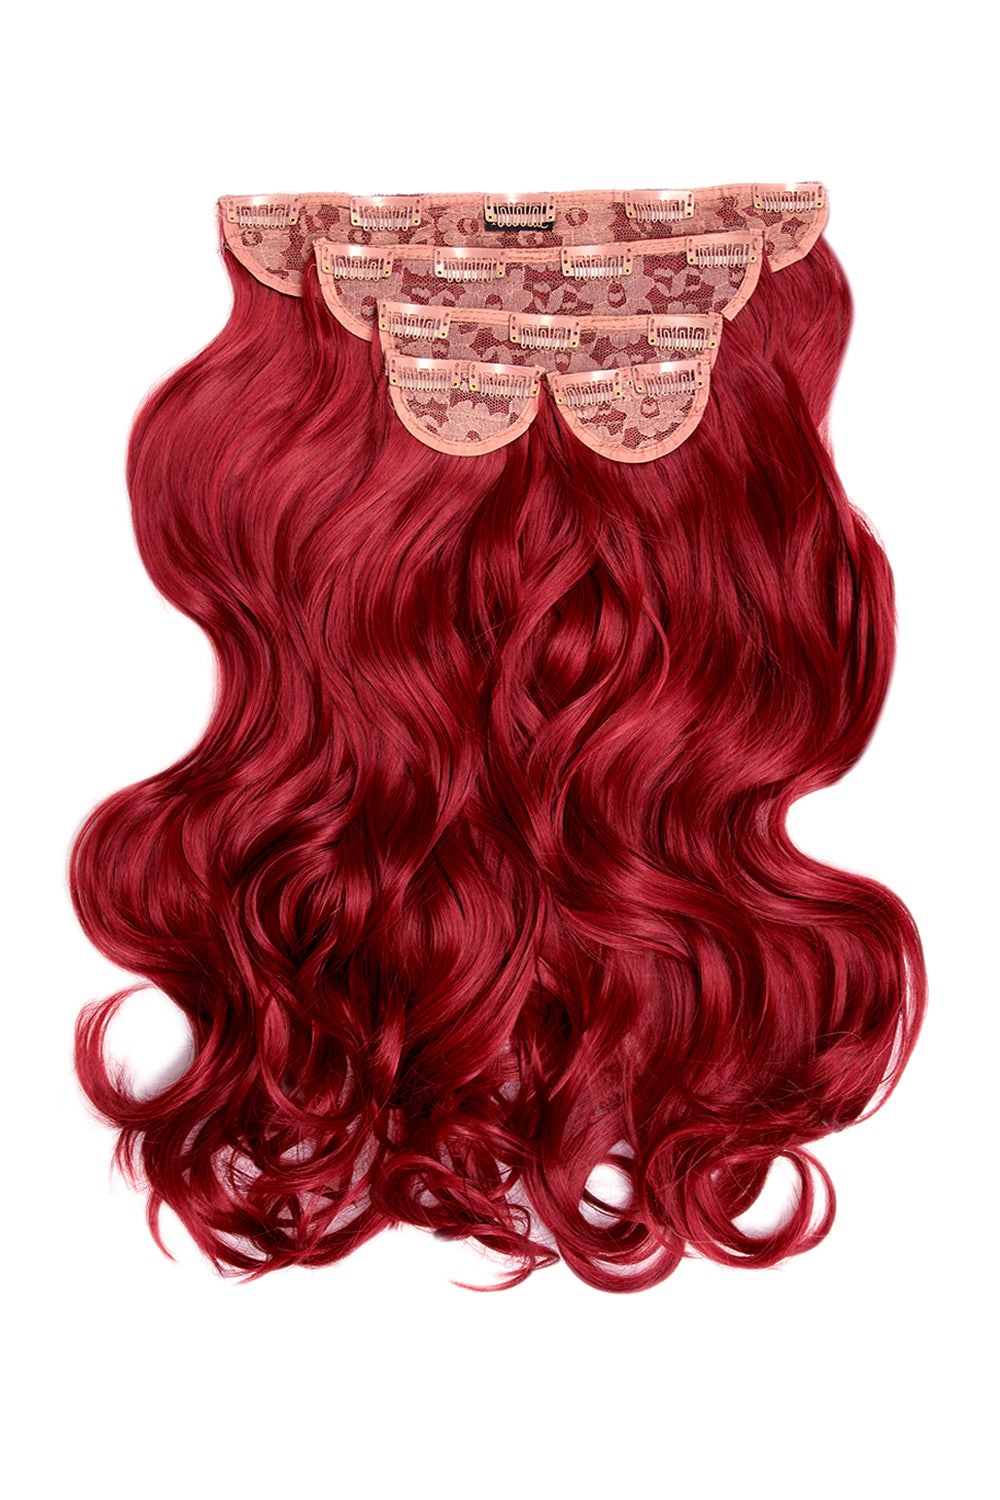 Super Thick 22" 5 Piece Natural Wavy Clip In Hair Extensions - LullaBellz - Ruby Red